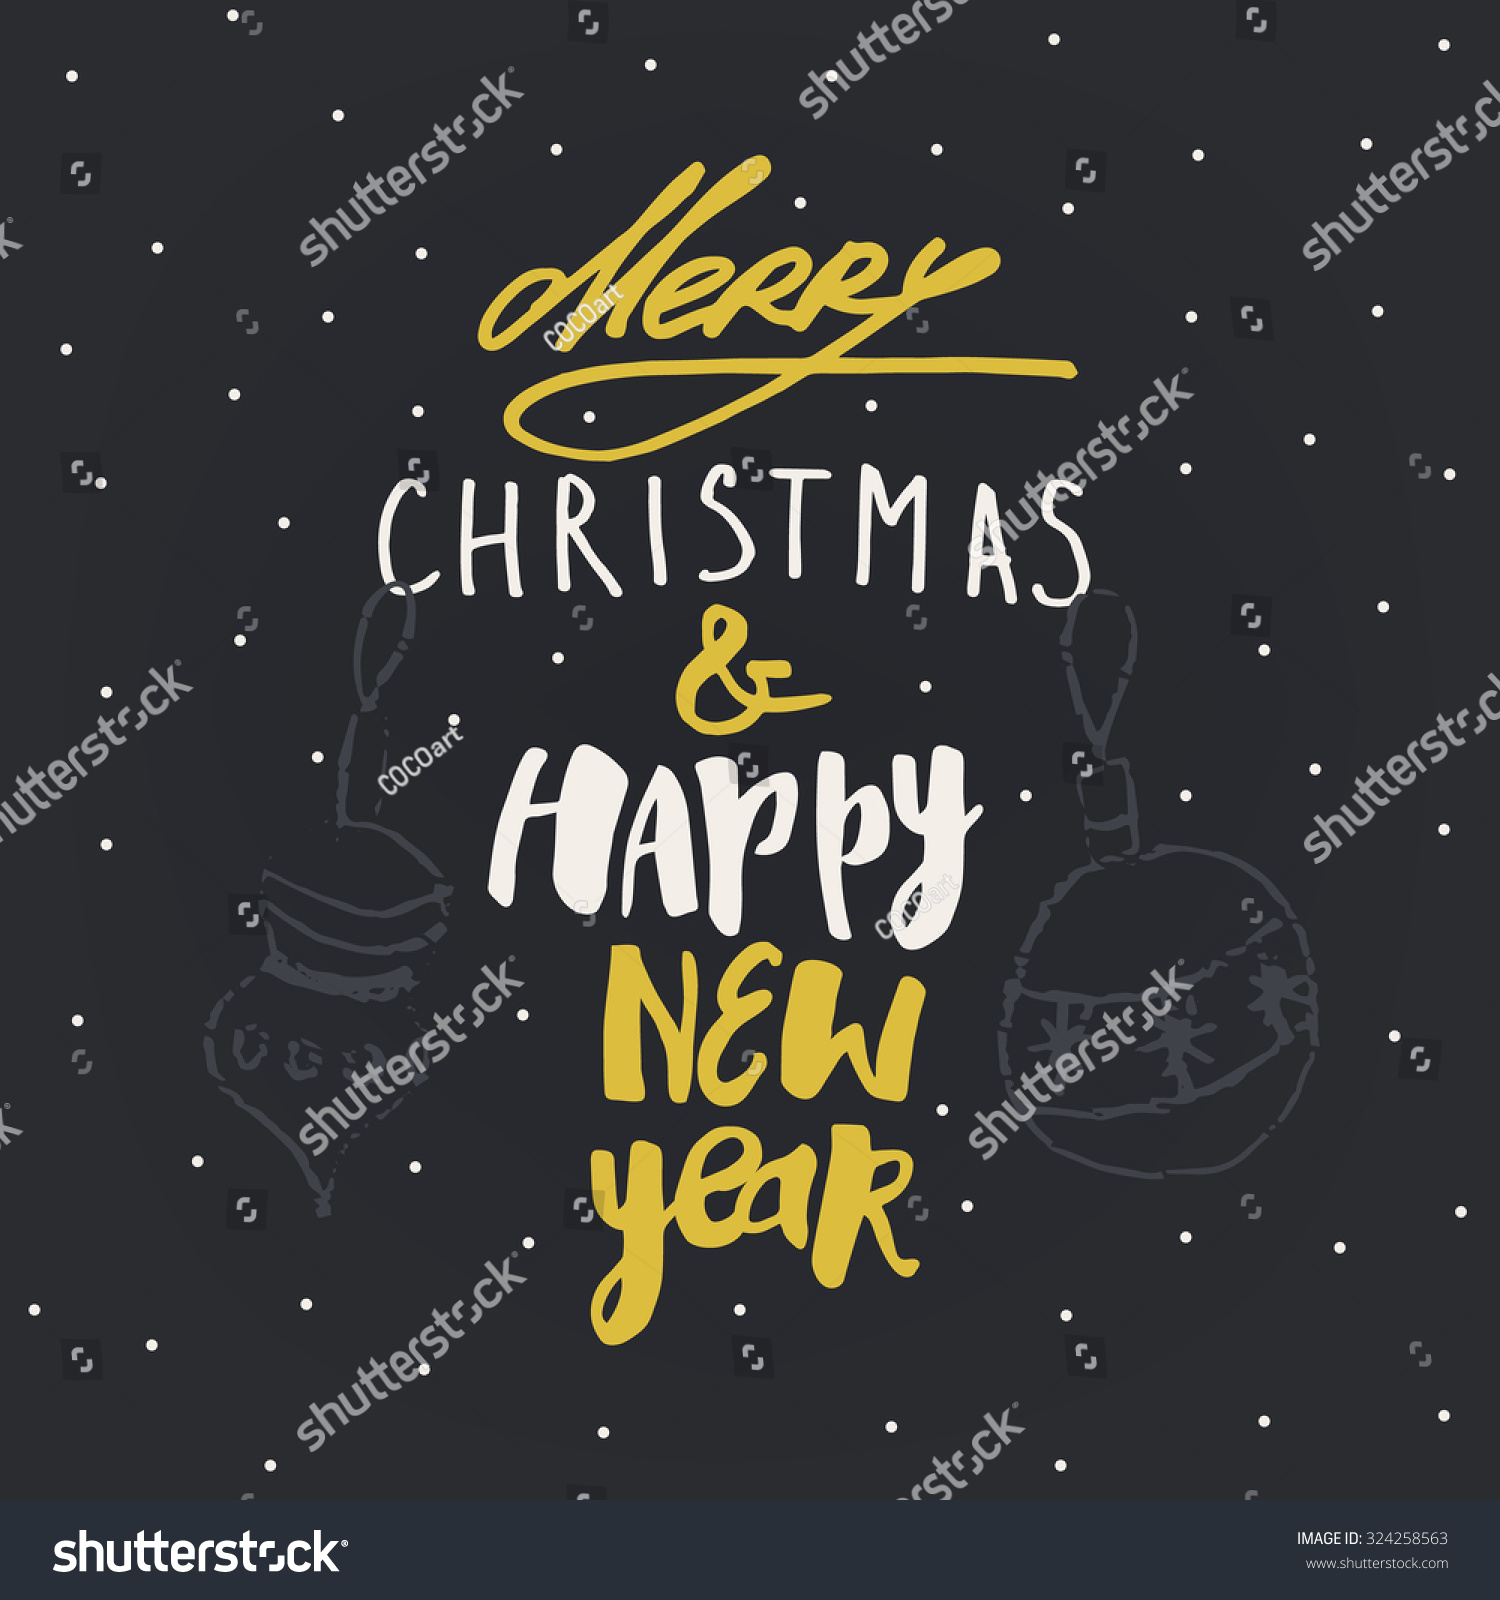 &quot;Merry Christmas &amp; Happy New Year&quot; Card Stock Vector Illustration 324258563 : Shutterstock